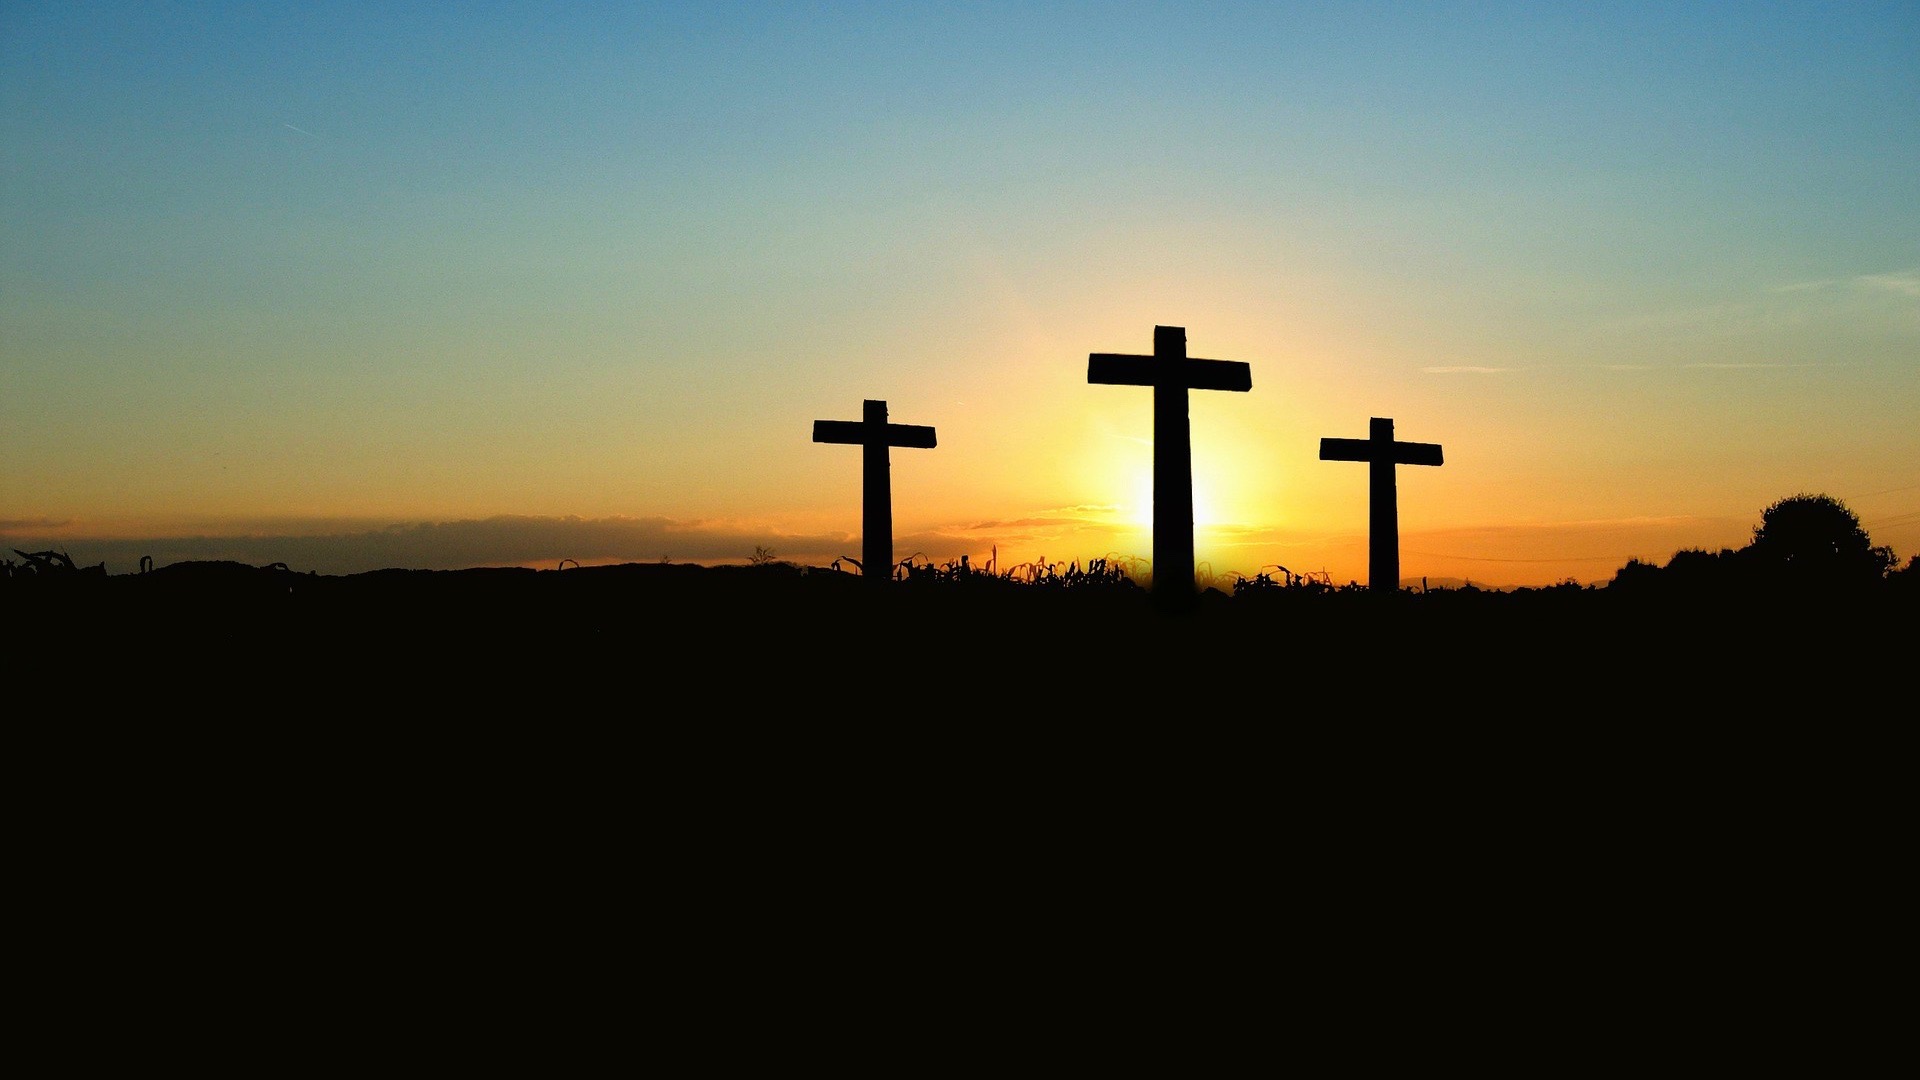 Three crosses in silhouette in front of a yellow sunset.